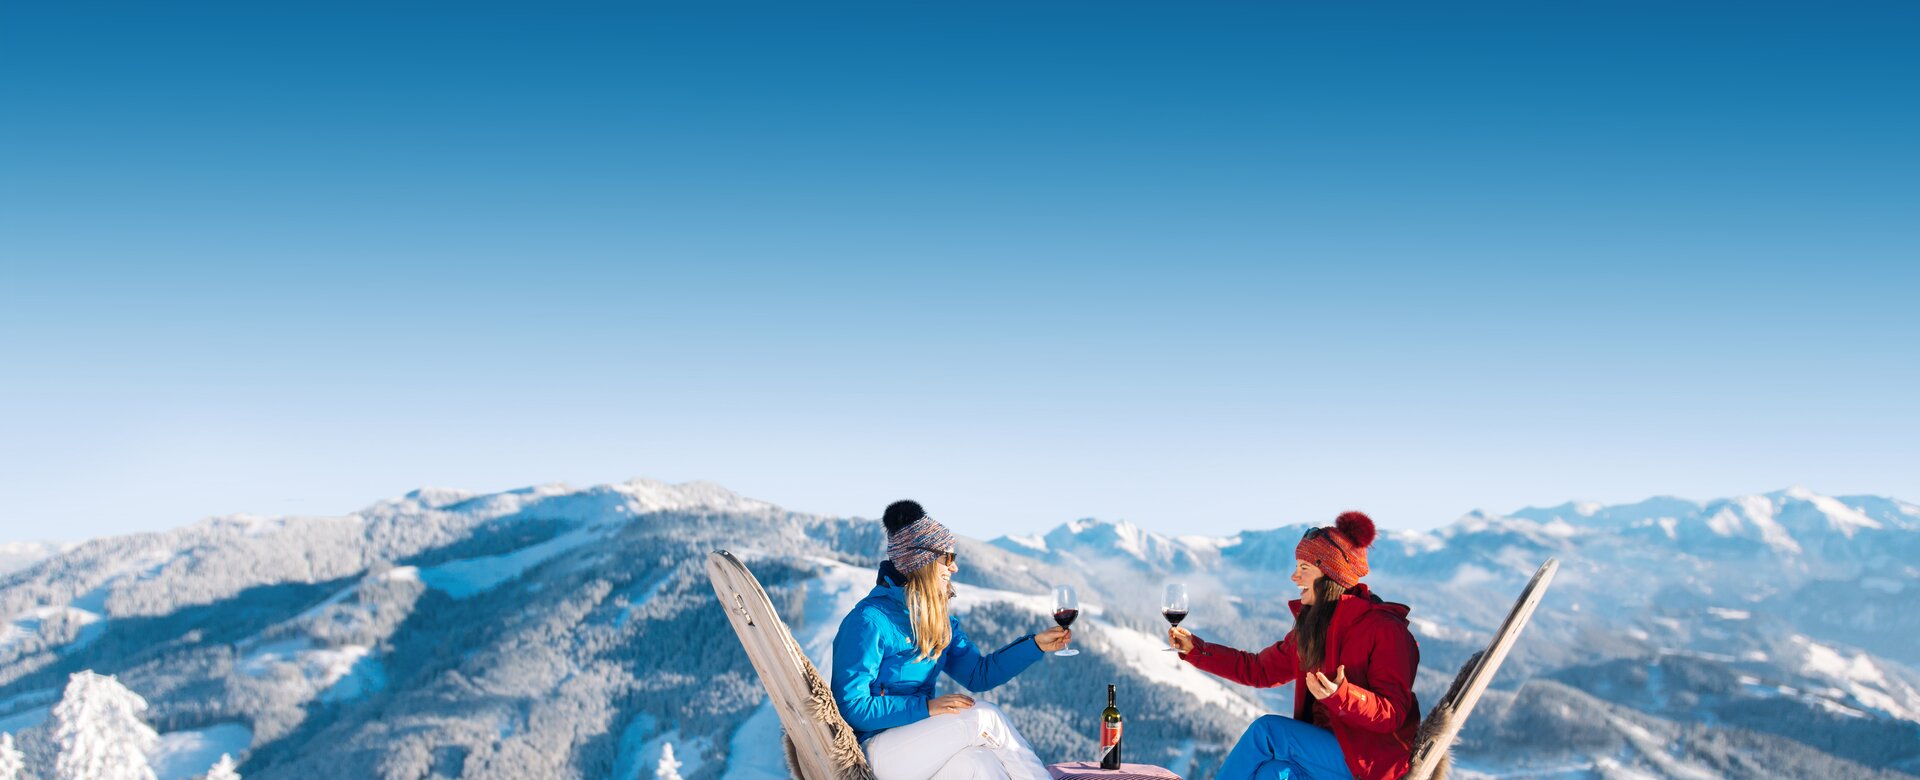 Ski and wine enjoyment for gourmets on the ski huts in Ski amadé